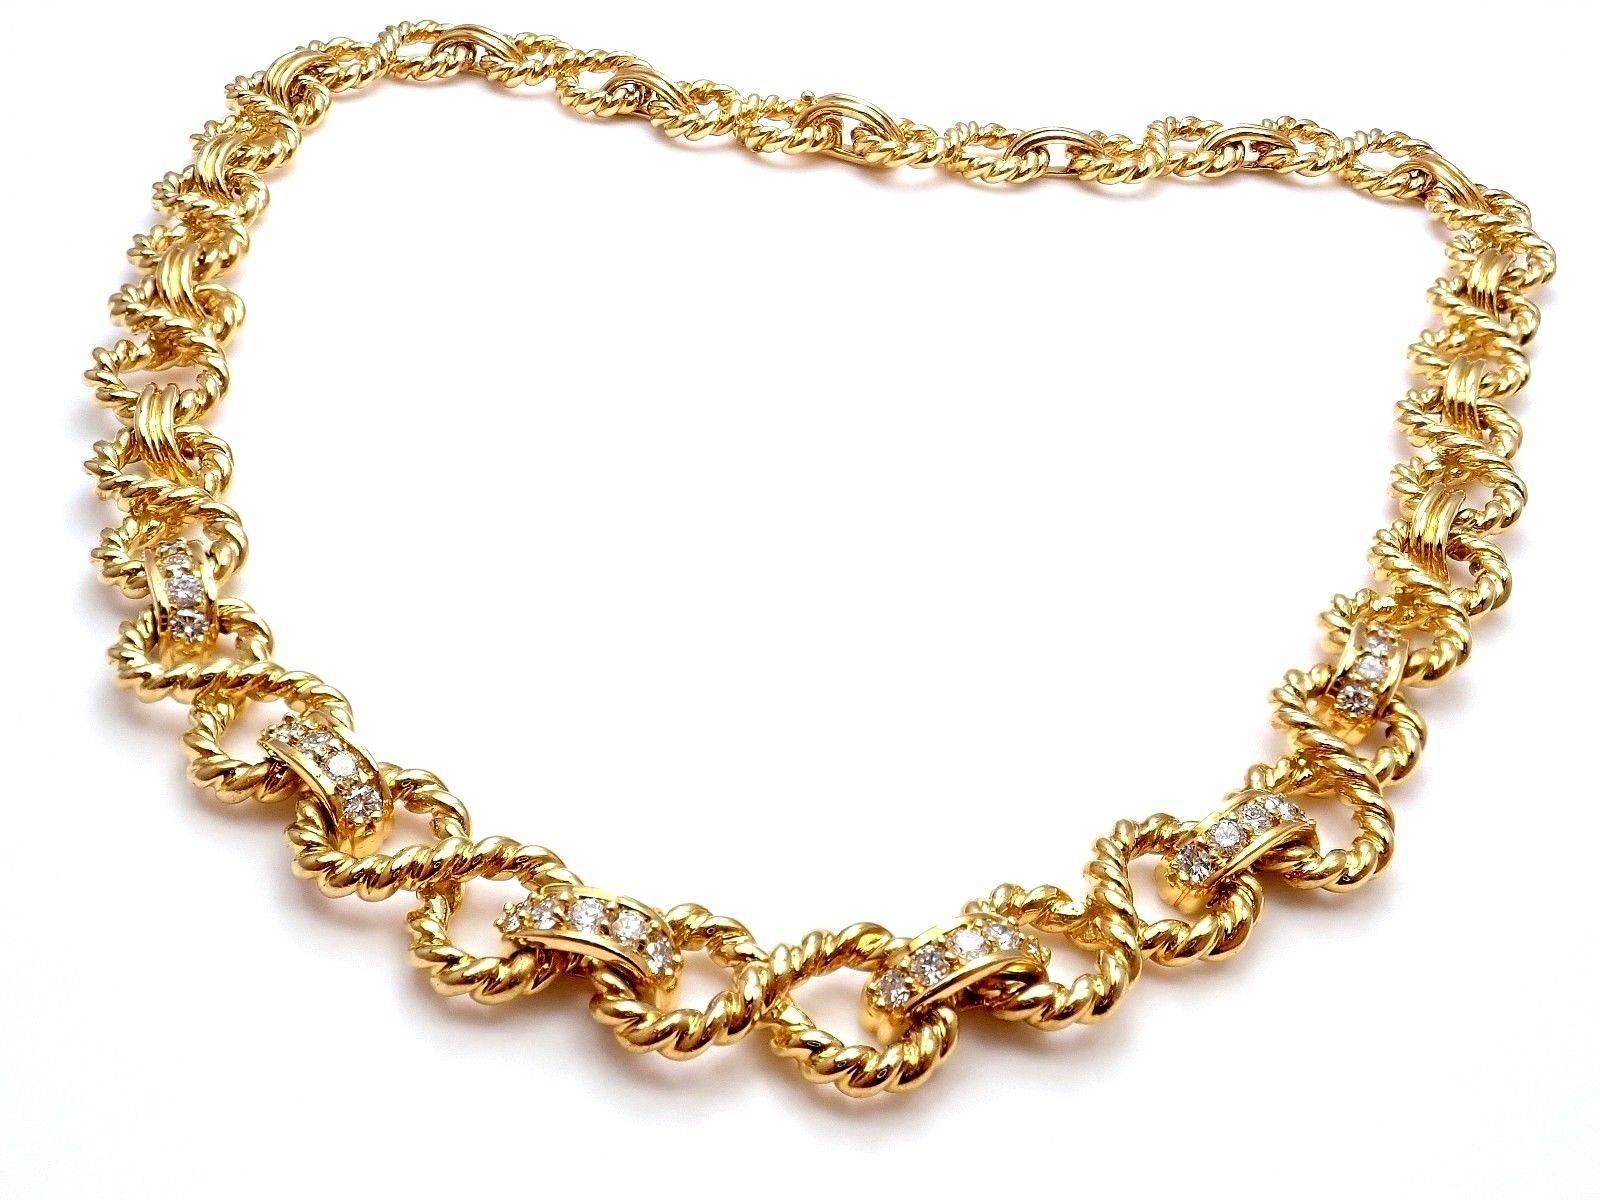 18k Yellow Gold Diamond Figure 8 Rope Link Necklace by Tiffany & Co. 
With 30 round brilliant cut diamonds VS1 clarity and G color total weight approx. 0.60ct
Details: 
Length: 15